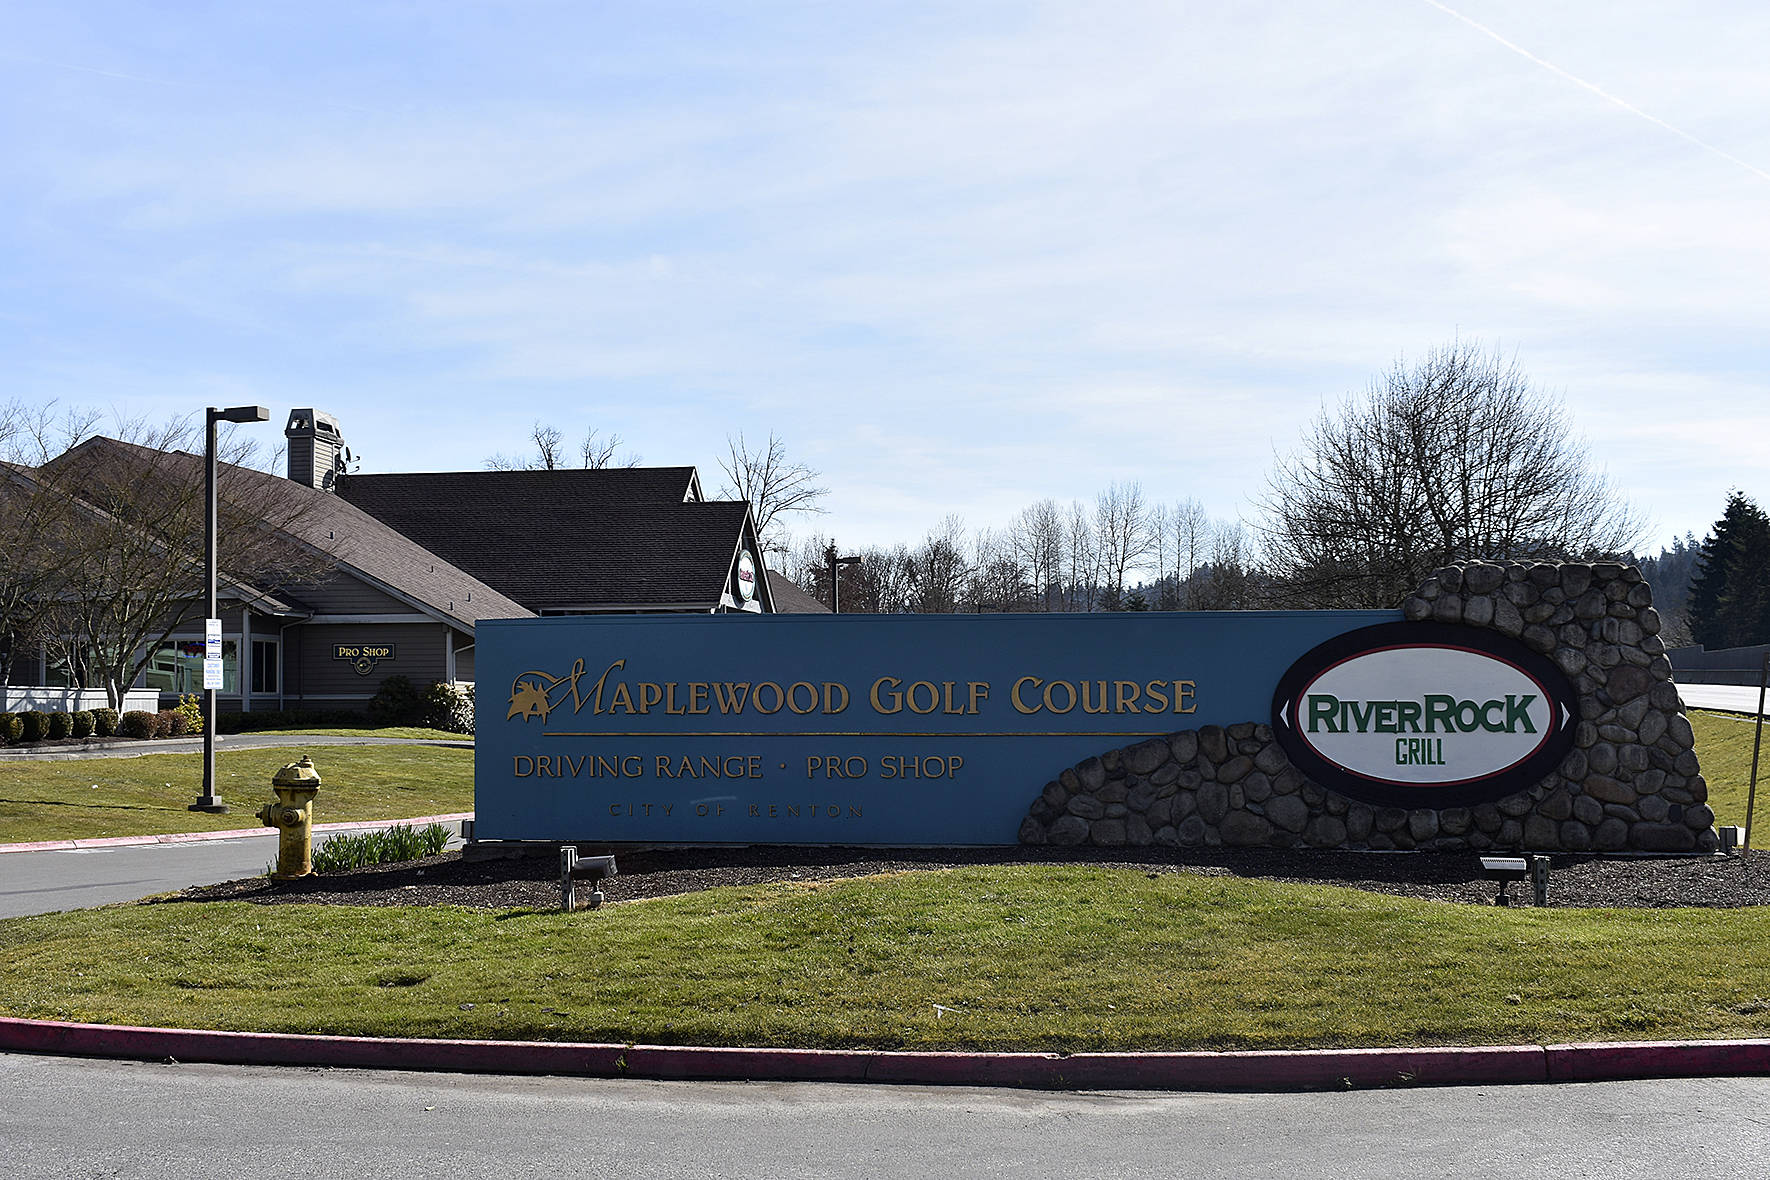 Photo by Haley Ausbun. The Maplewood golf course, where a former employee of the Pro Shop on site told state auditors he defrauded the city of thousands of dollars.